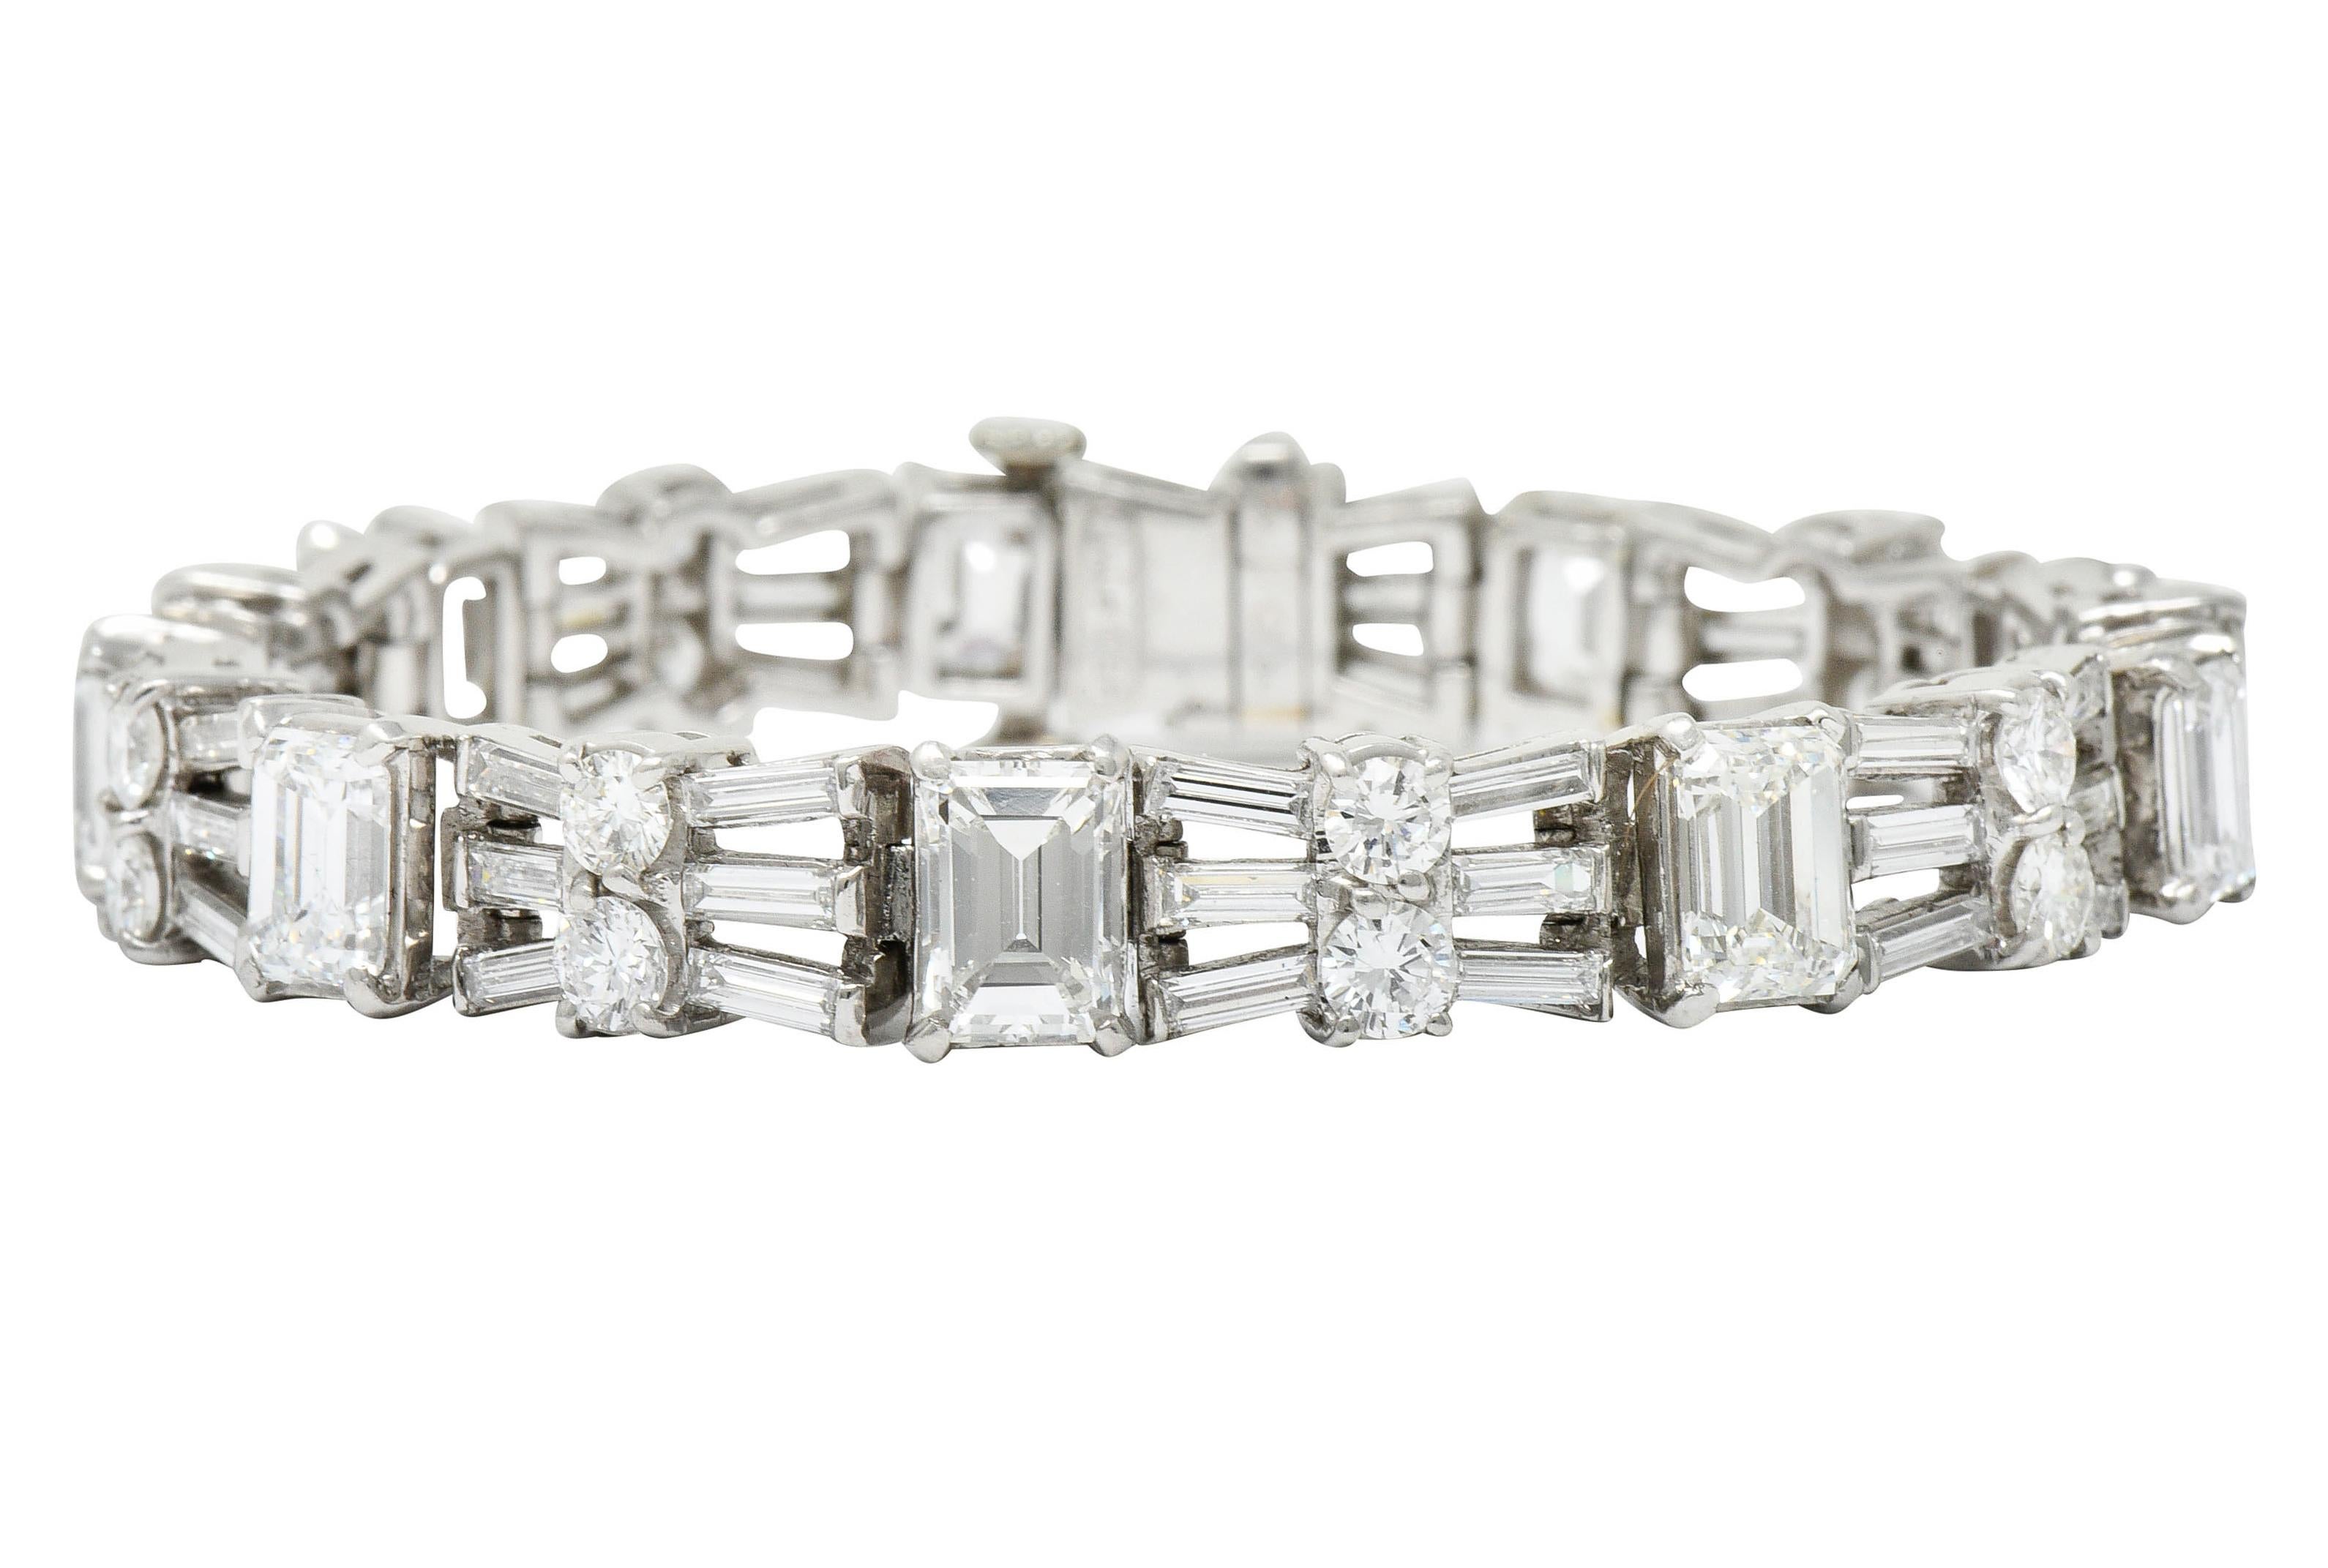 Stylized line bracelet features basket set emerald cut diamonds weighing in total approximately 9.90 carats

Alternating with stylized bow motif links comprised of baguette cut and round brilliant cut diamonds

Baguette cut diamonds weigh